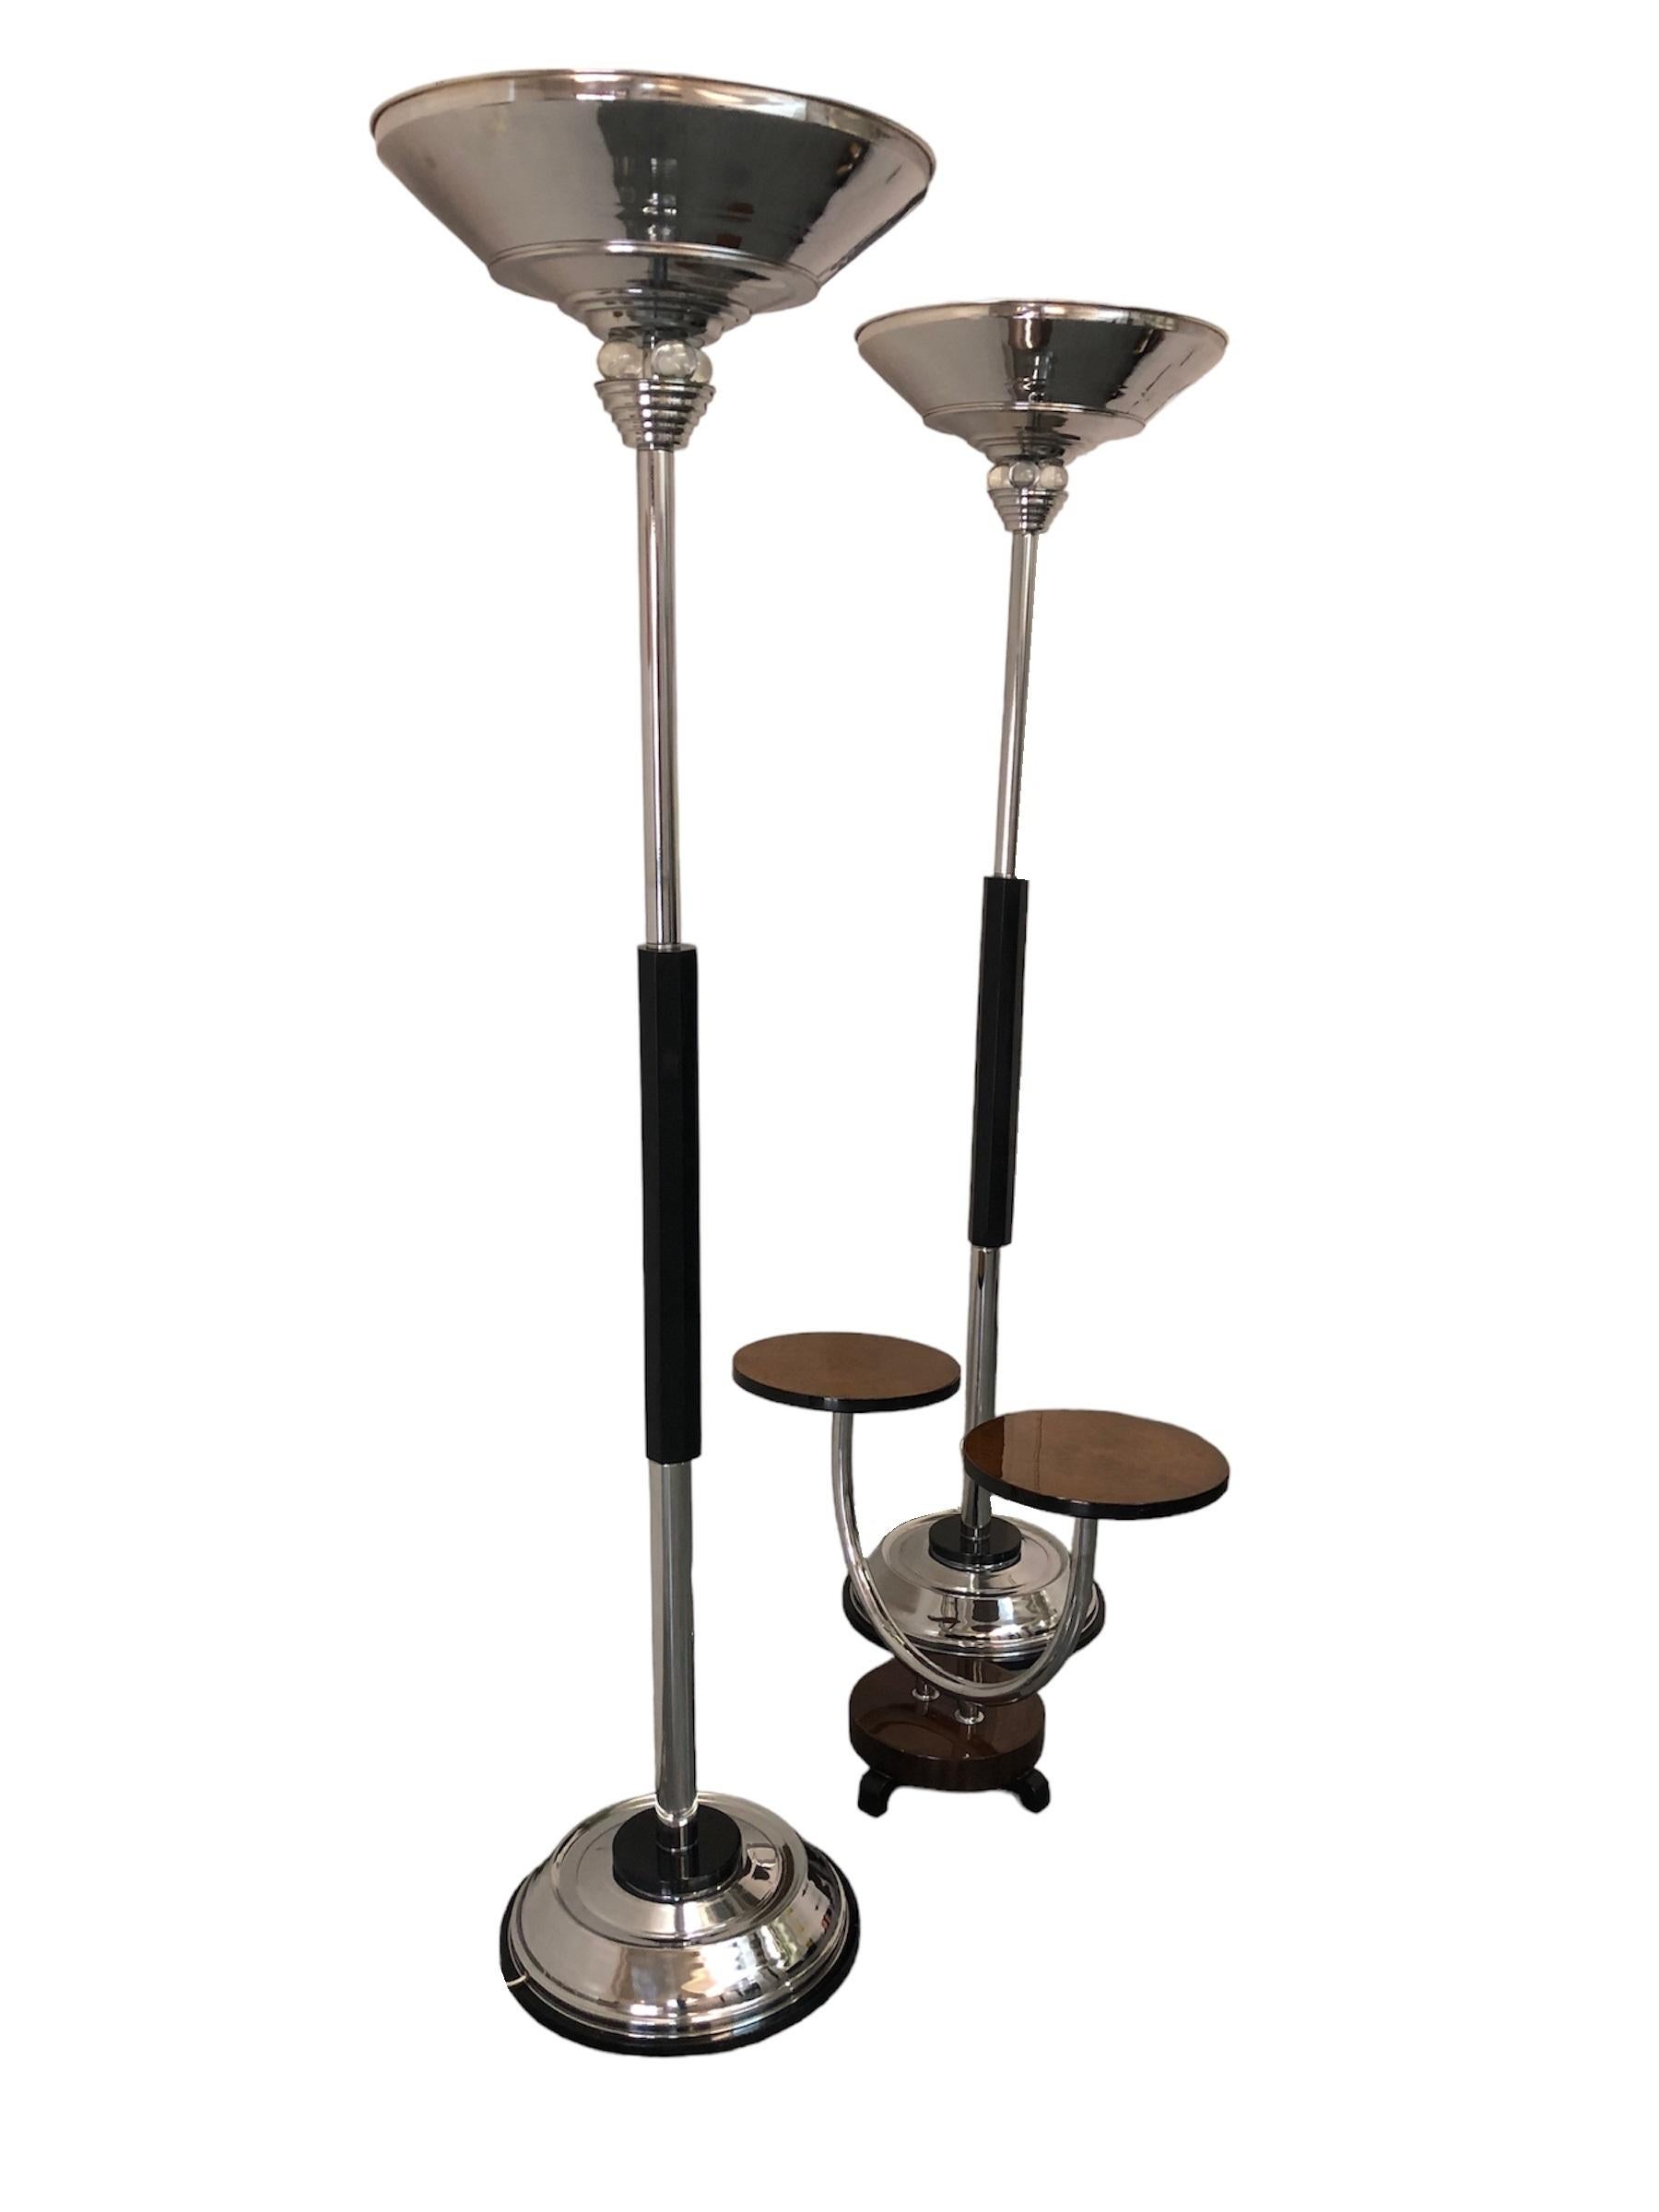 2 Art Deco Floor Lamps, France, Materials: Wood, glass and Chrome, 1940 For Sale 10